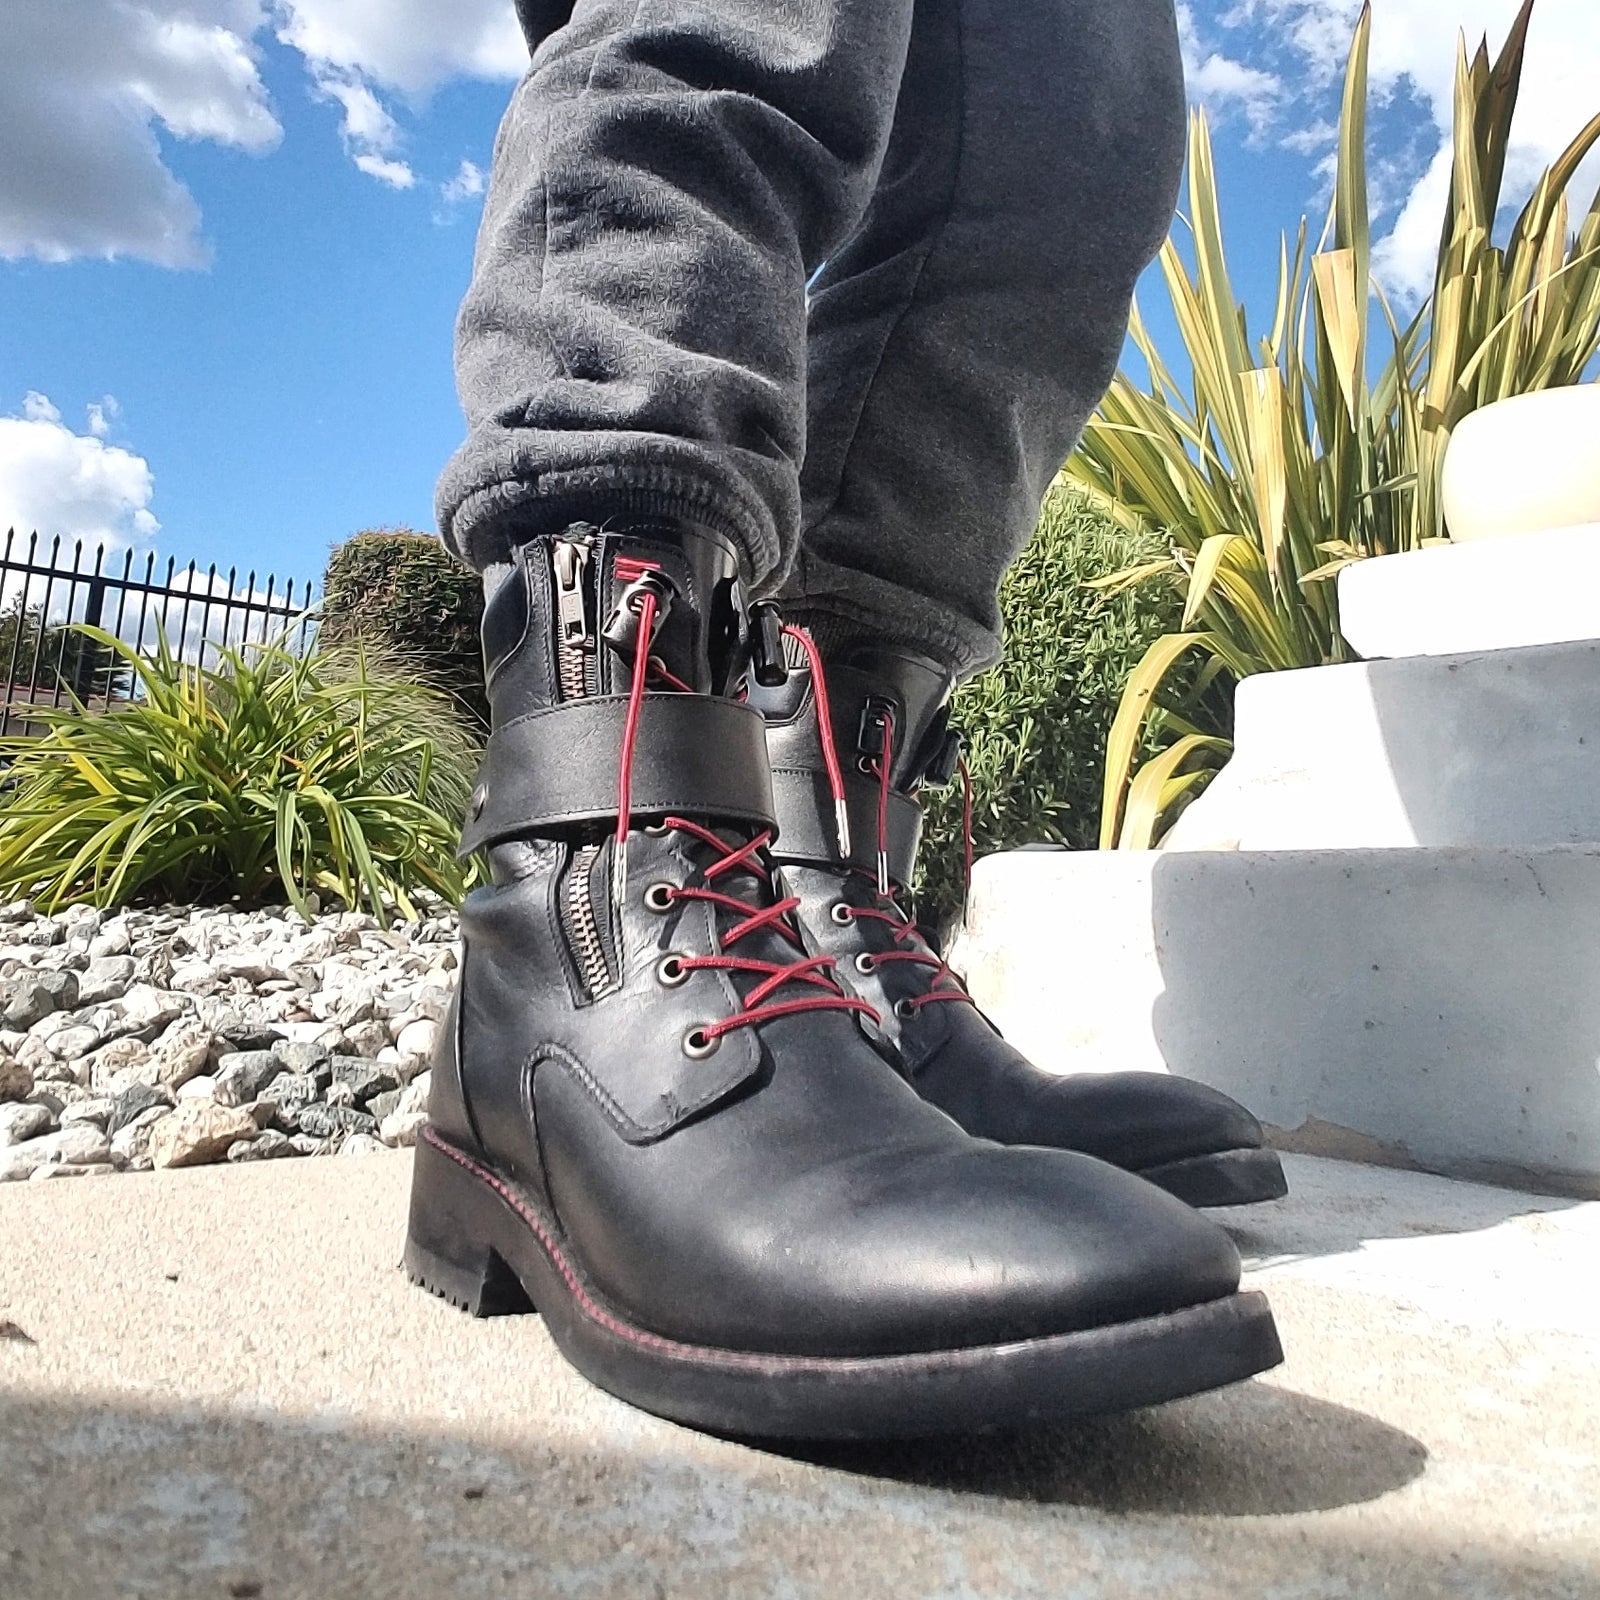 Combat H8 Boots with red shoelaces